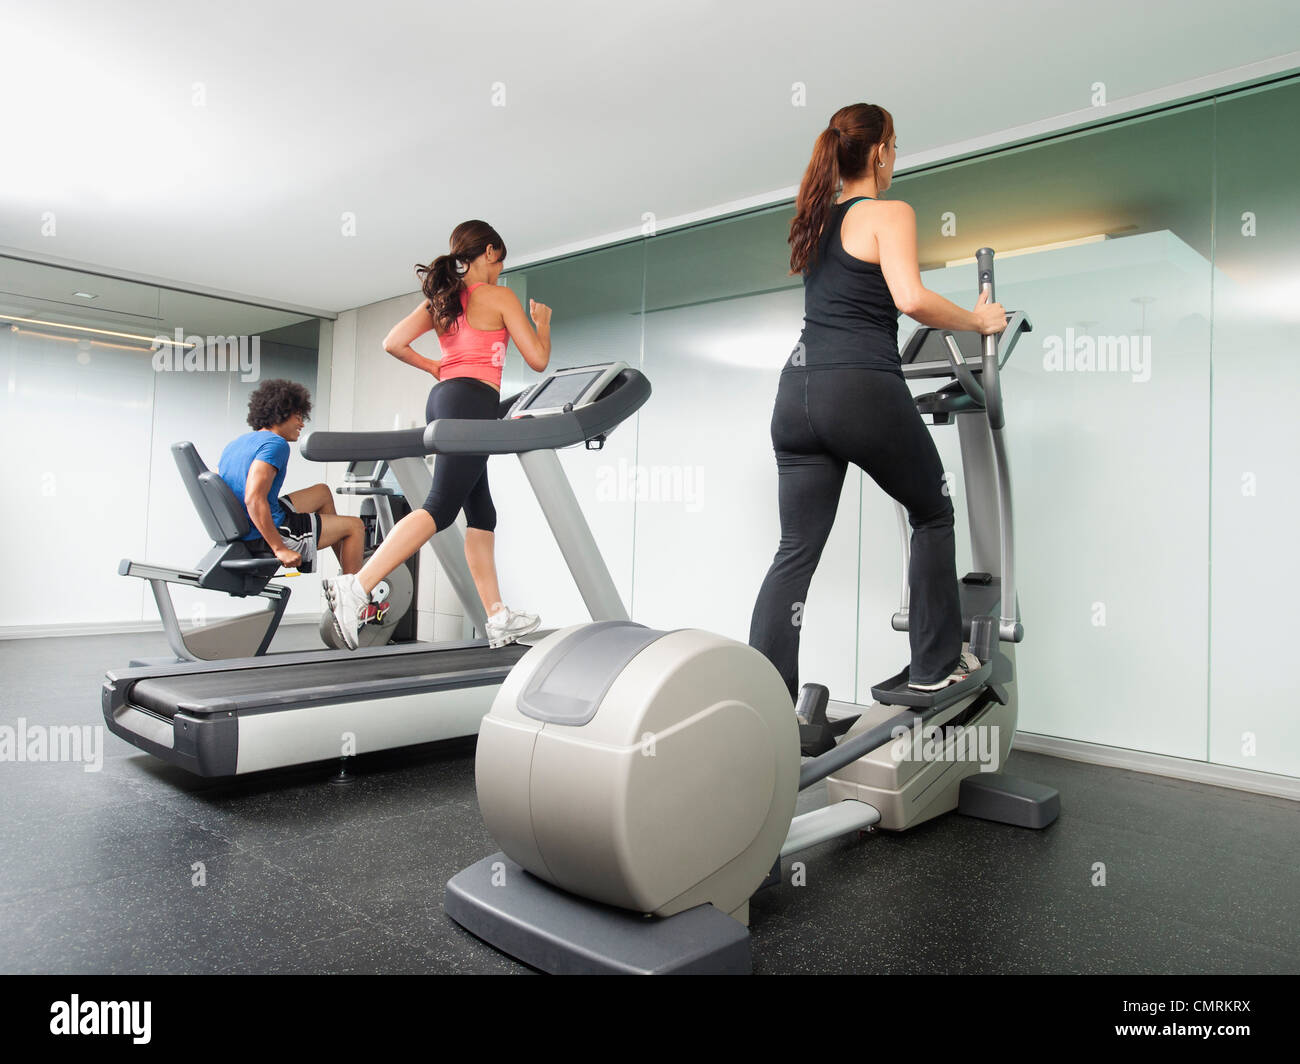 People using gym exercise equipment Stock Photo